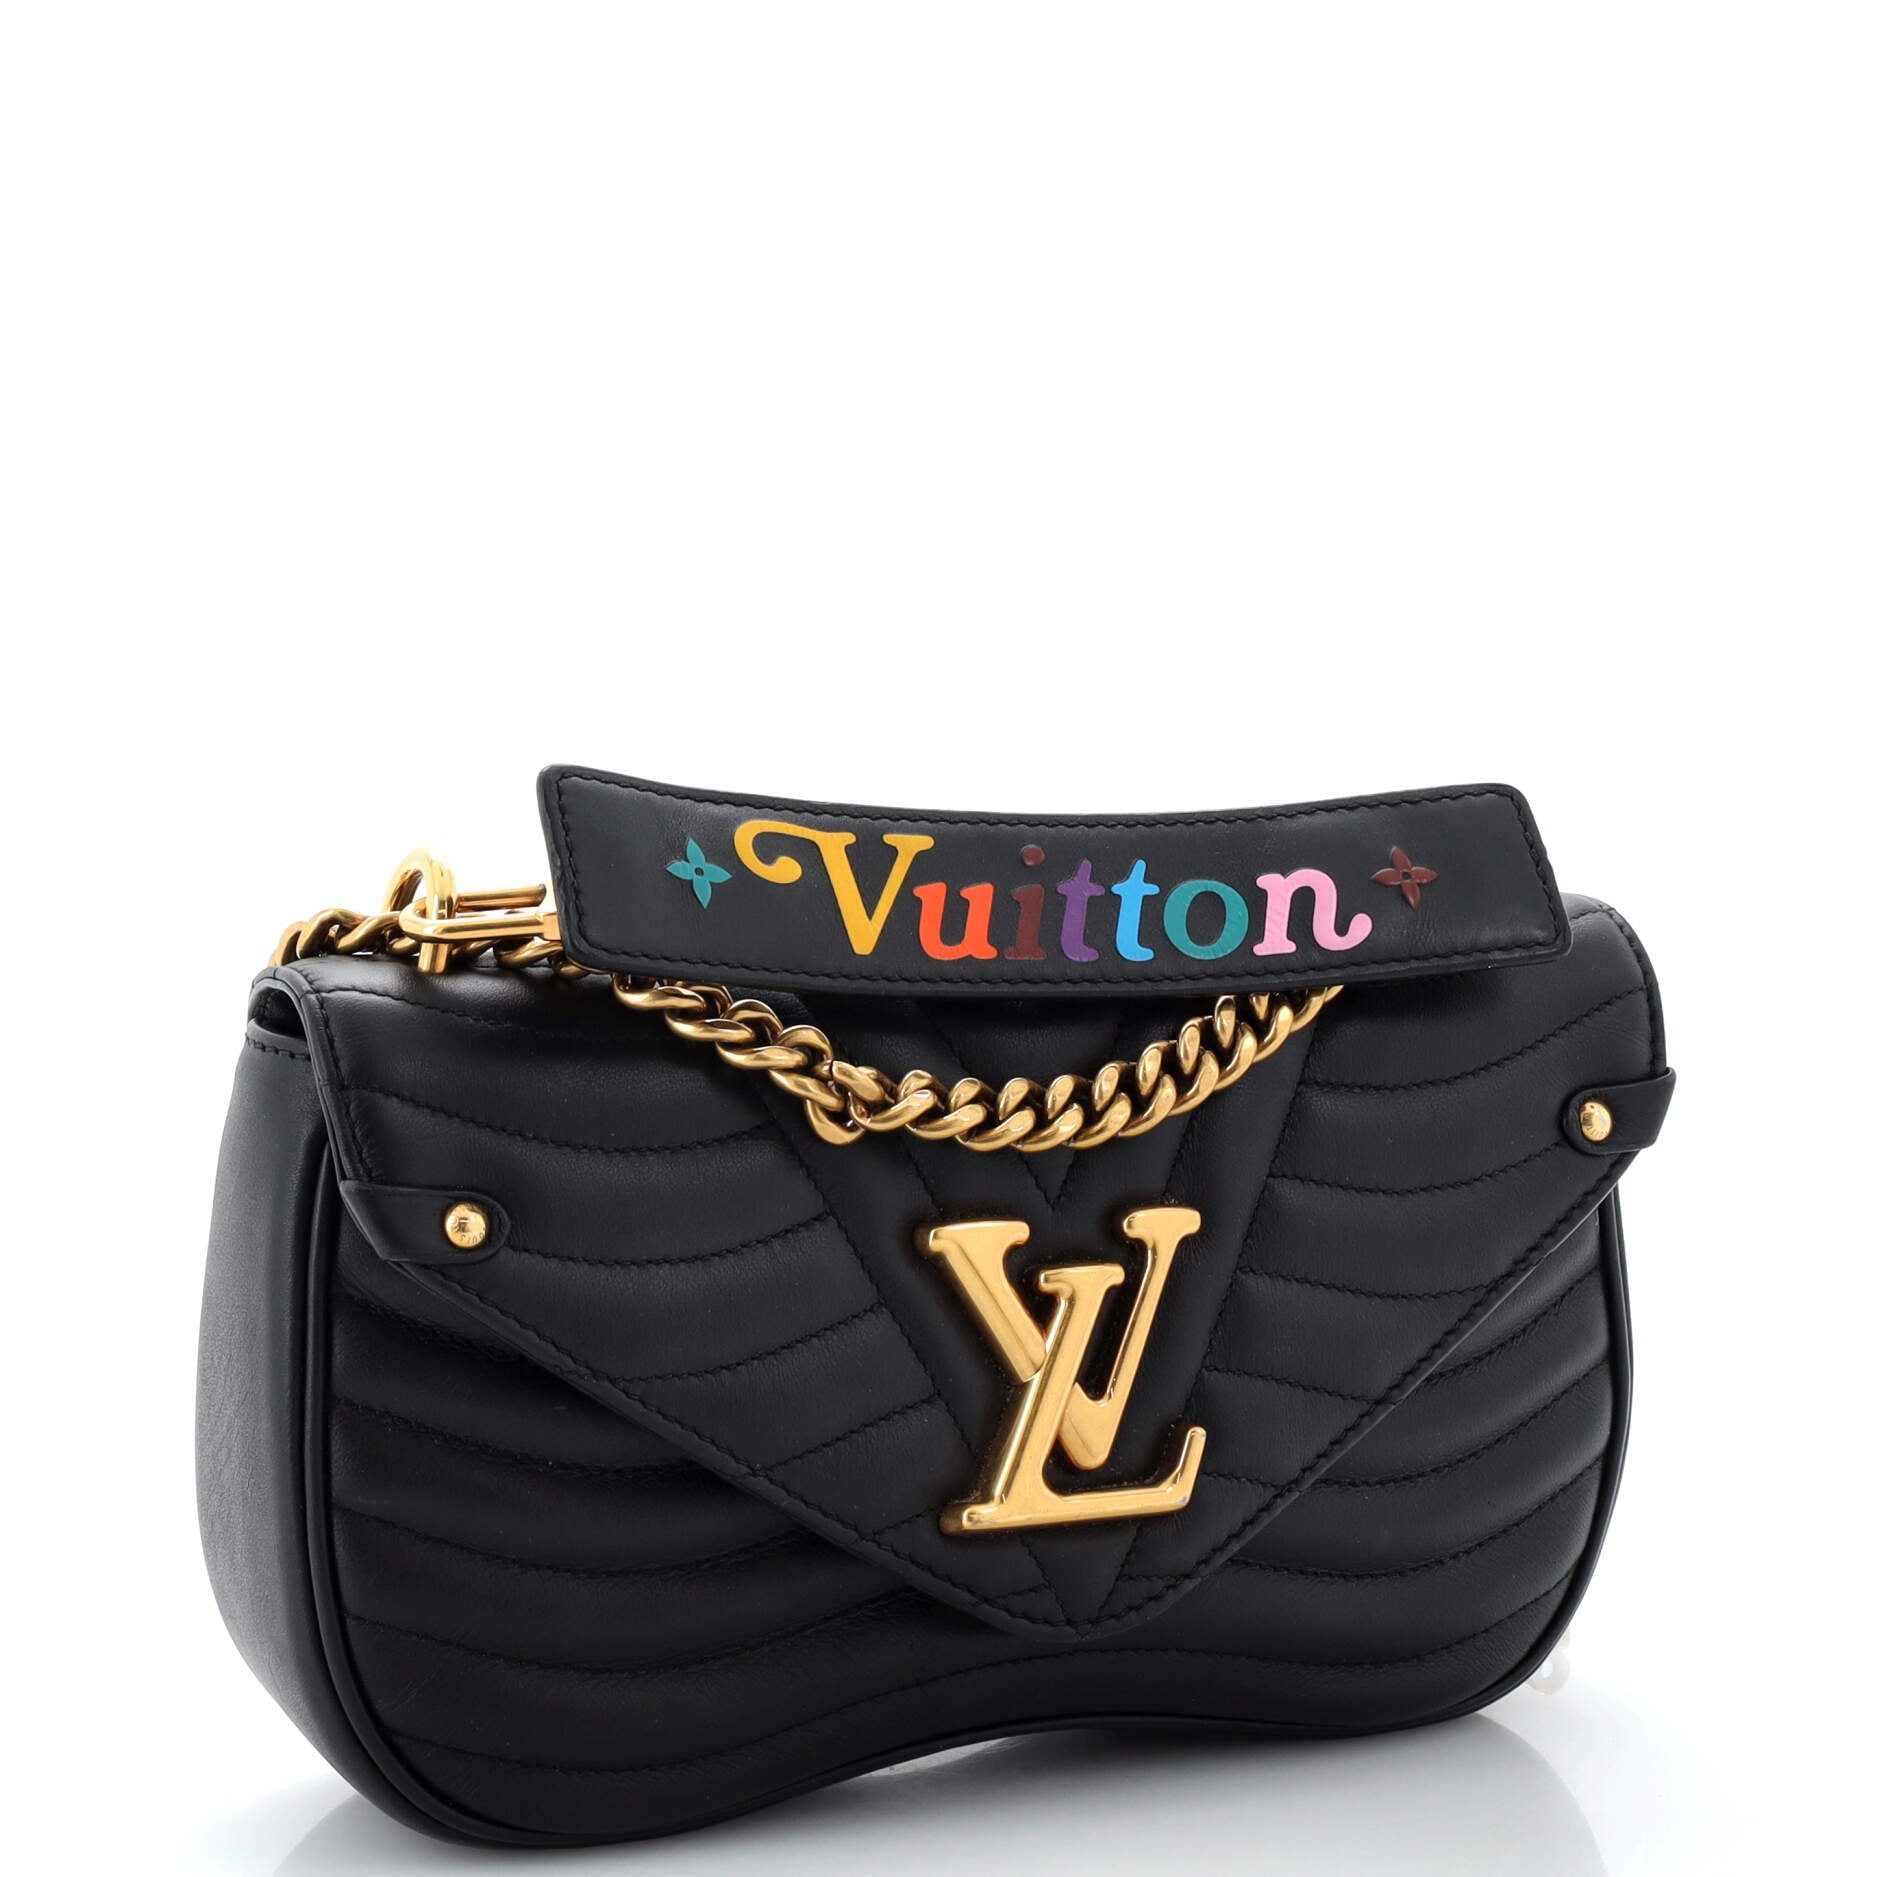 Coeur new wave leather handbag Louis Vuitton Black in Leather